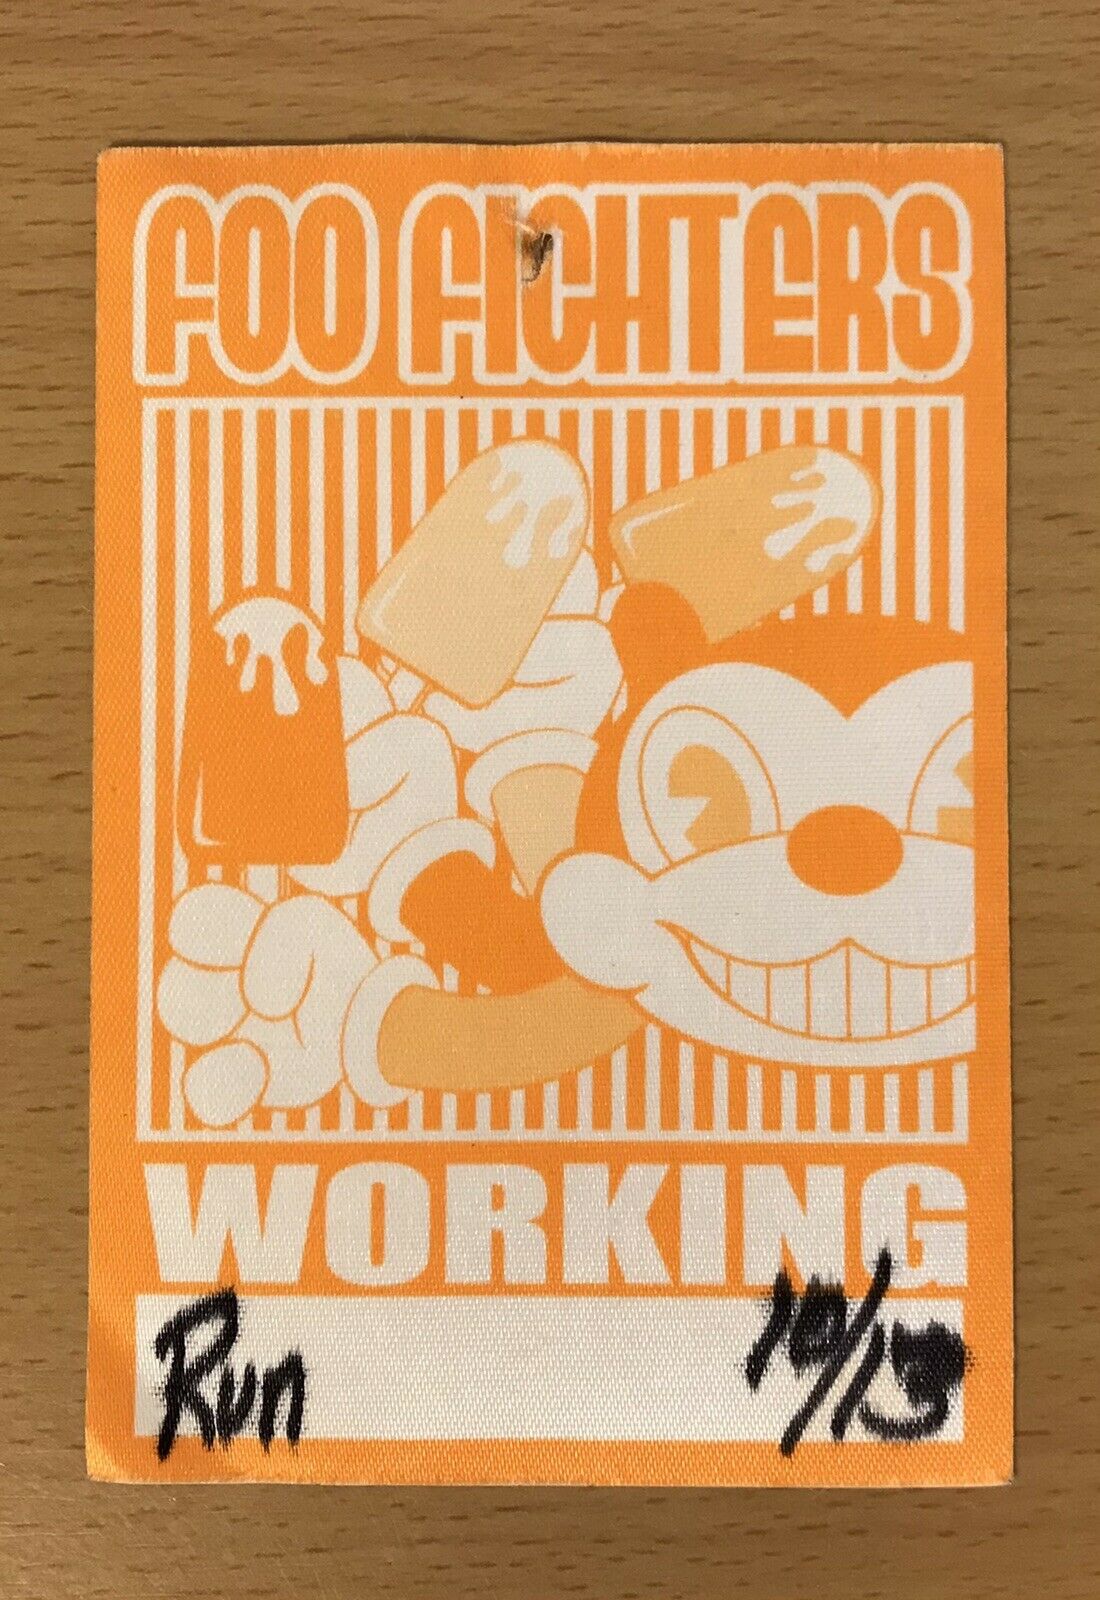 2004 Foo Fighters In Your Honor Tour Tempe Arizona Concert Backstage Pass Grohl